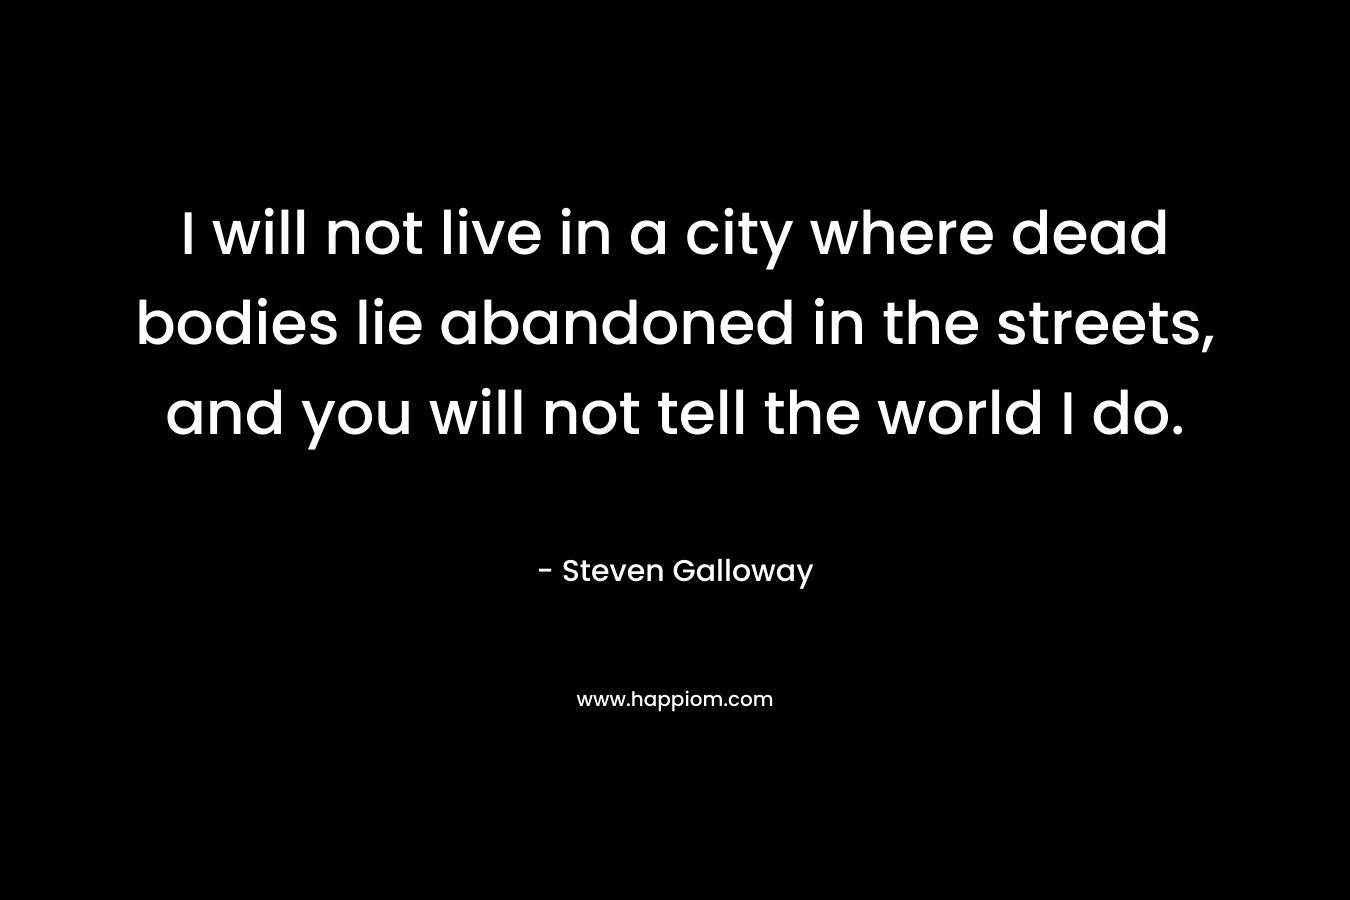 I will not live in a city where dead bodies lie abandoned in the streets, and you will not tell the world I do.